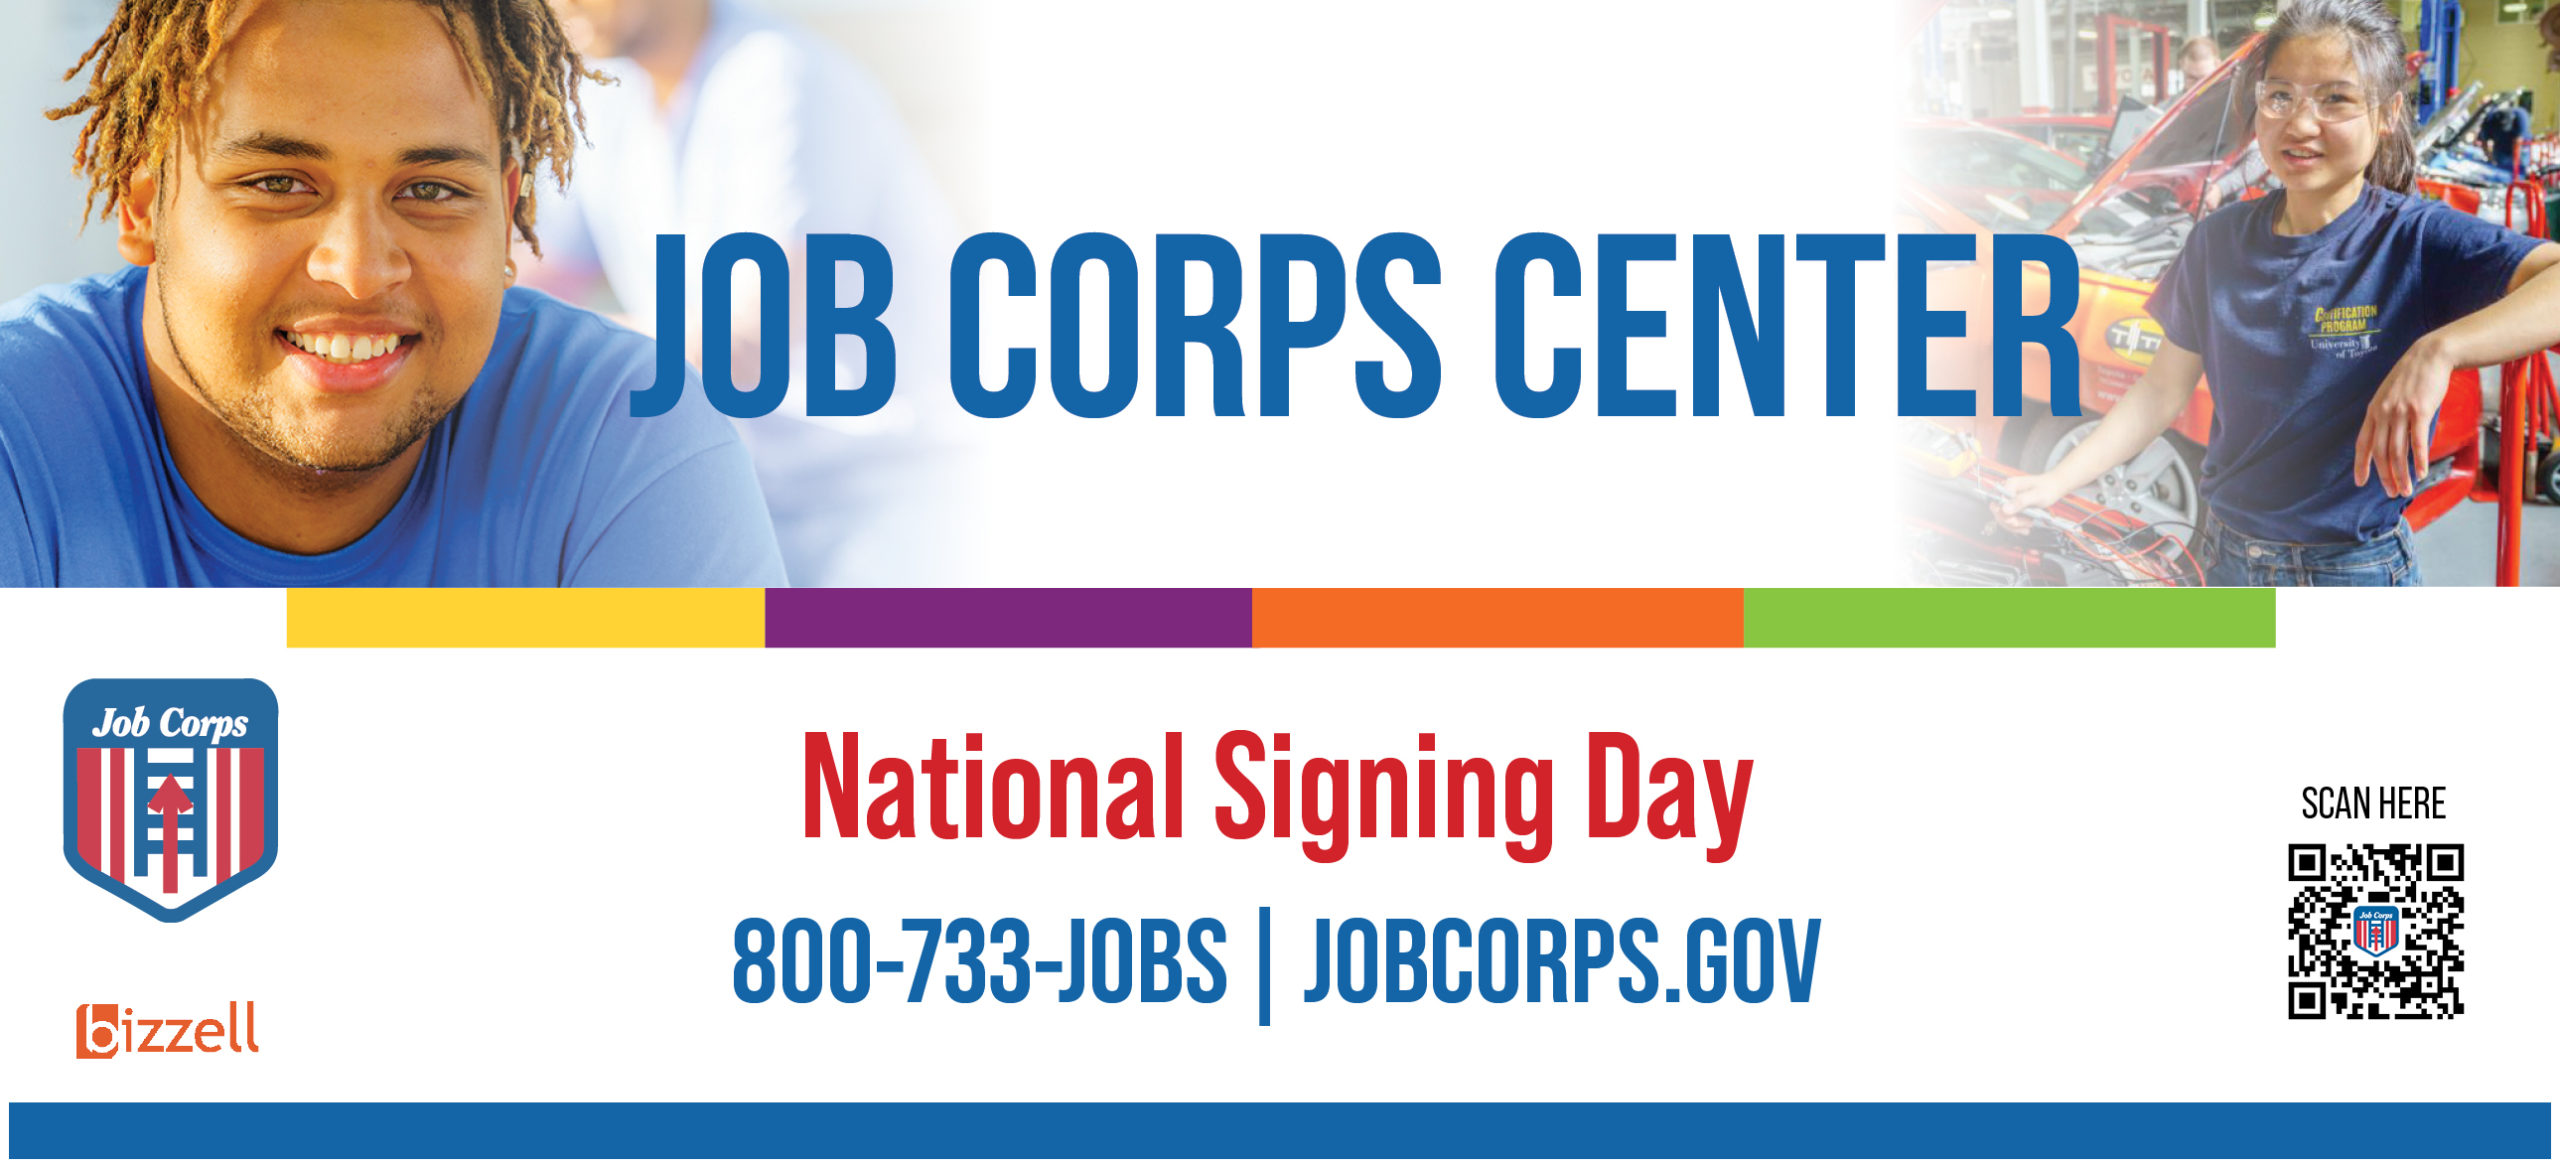 Job Corps Center, National Signing Day, 800-733-JOBS, jobcorps.gov